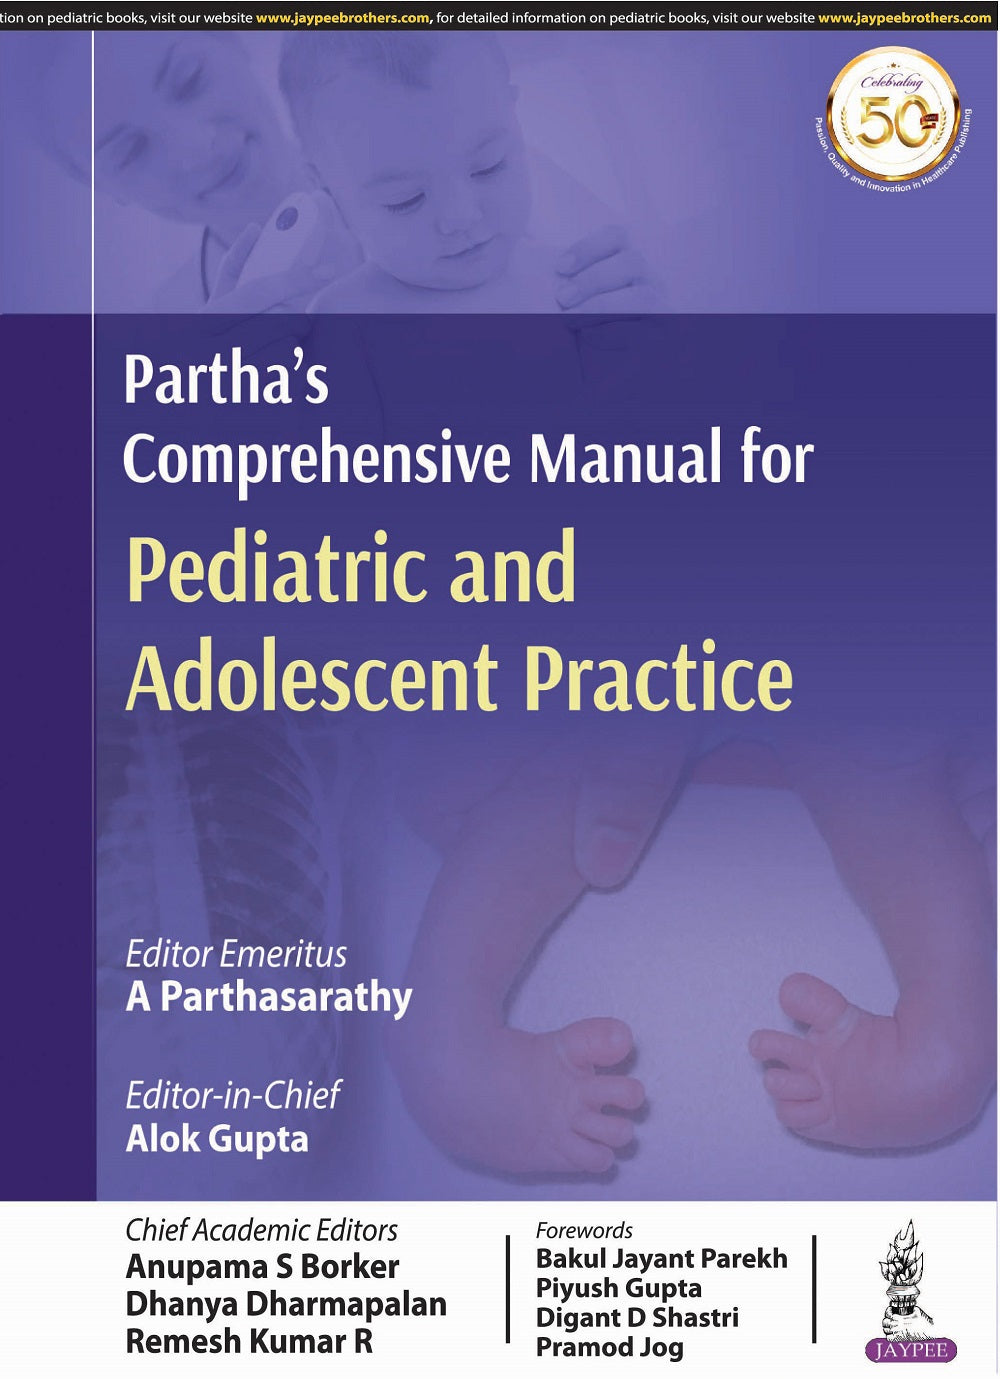 PARTHA’S COMPREHENSIVE MANUAL FOR PEDIATRIC AND ADOLESCENT PRACTICE,1/E,A PARTHASARATHY